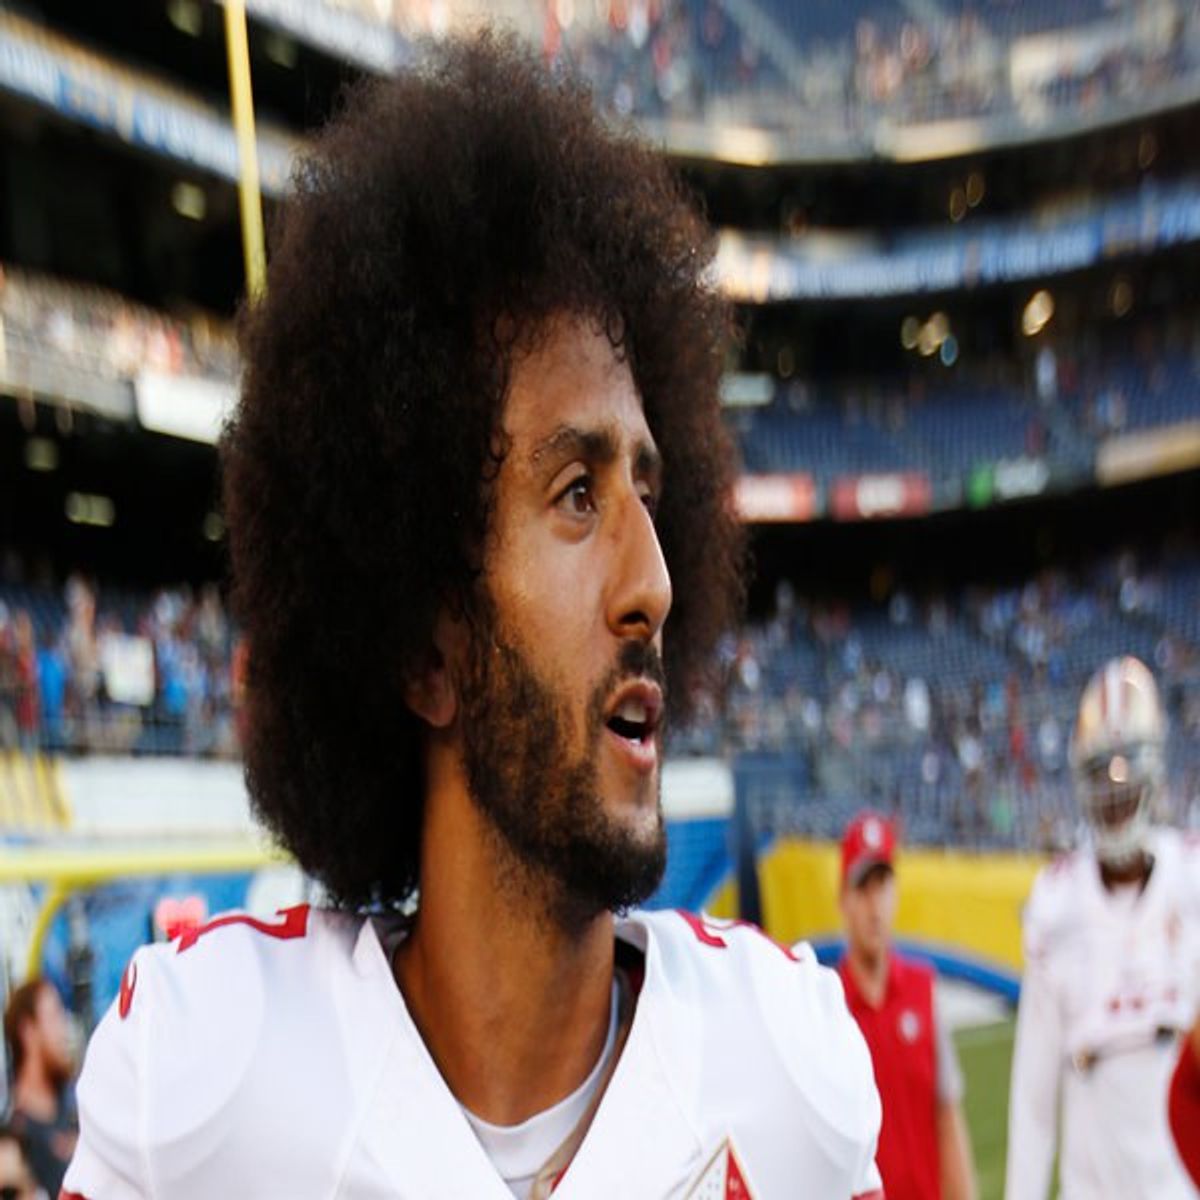 Why Colin Kaepernick Kneeling For The National Anthem Isn't Nearly As Big Of A Deal As You Think